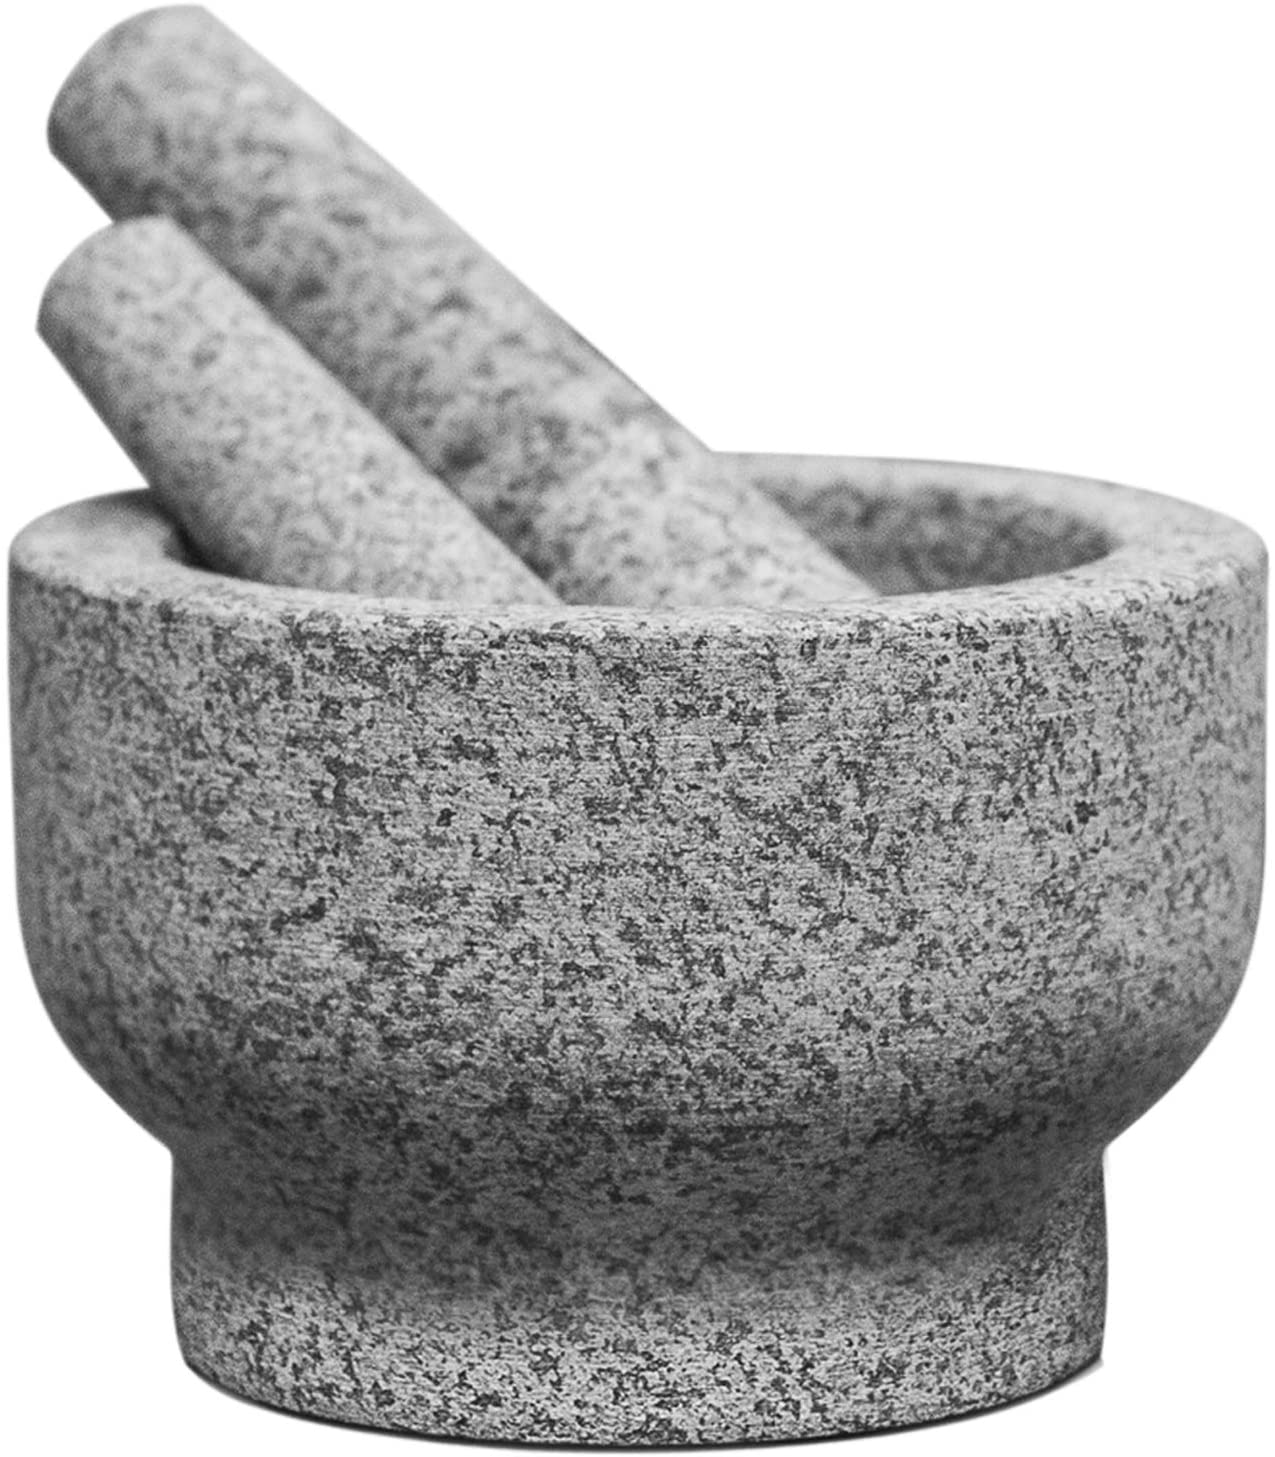 Why It's Really, Truly Worth it to Finally Buy Yourself a Mortar and Pestle,  Because it'll Make You a Better Cook